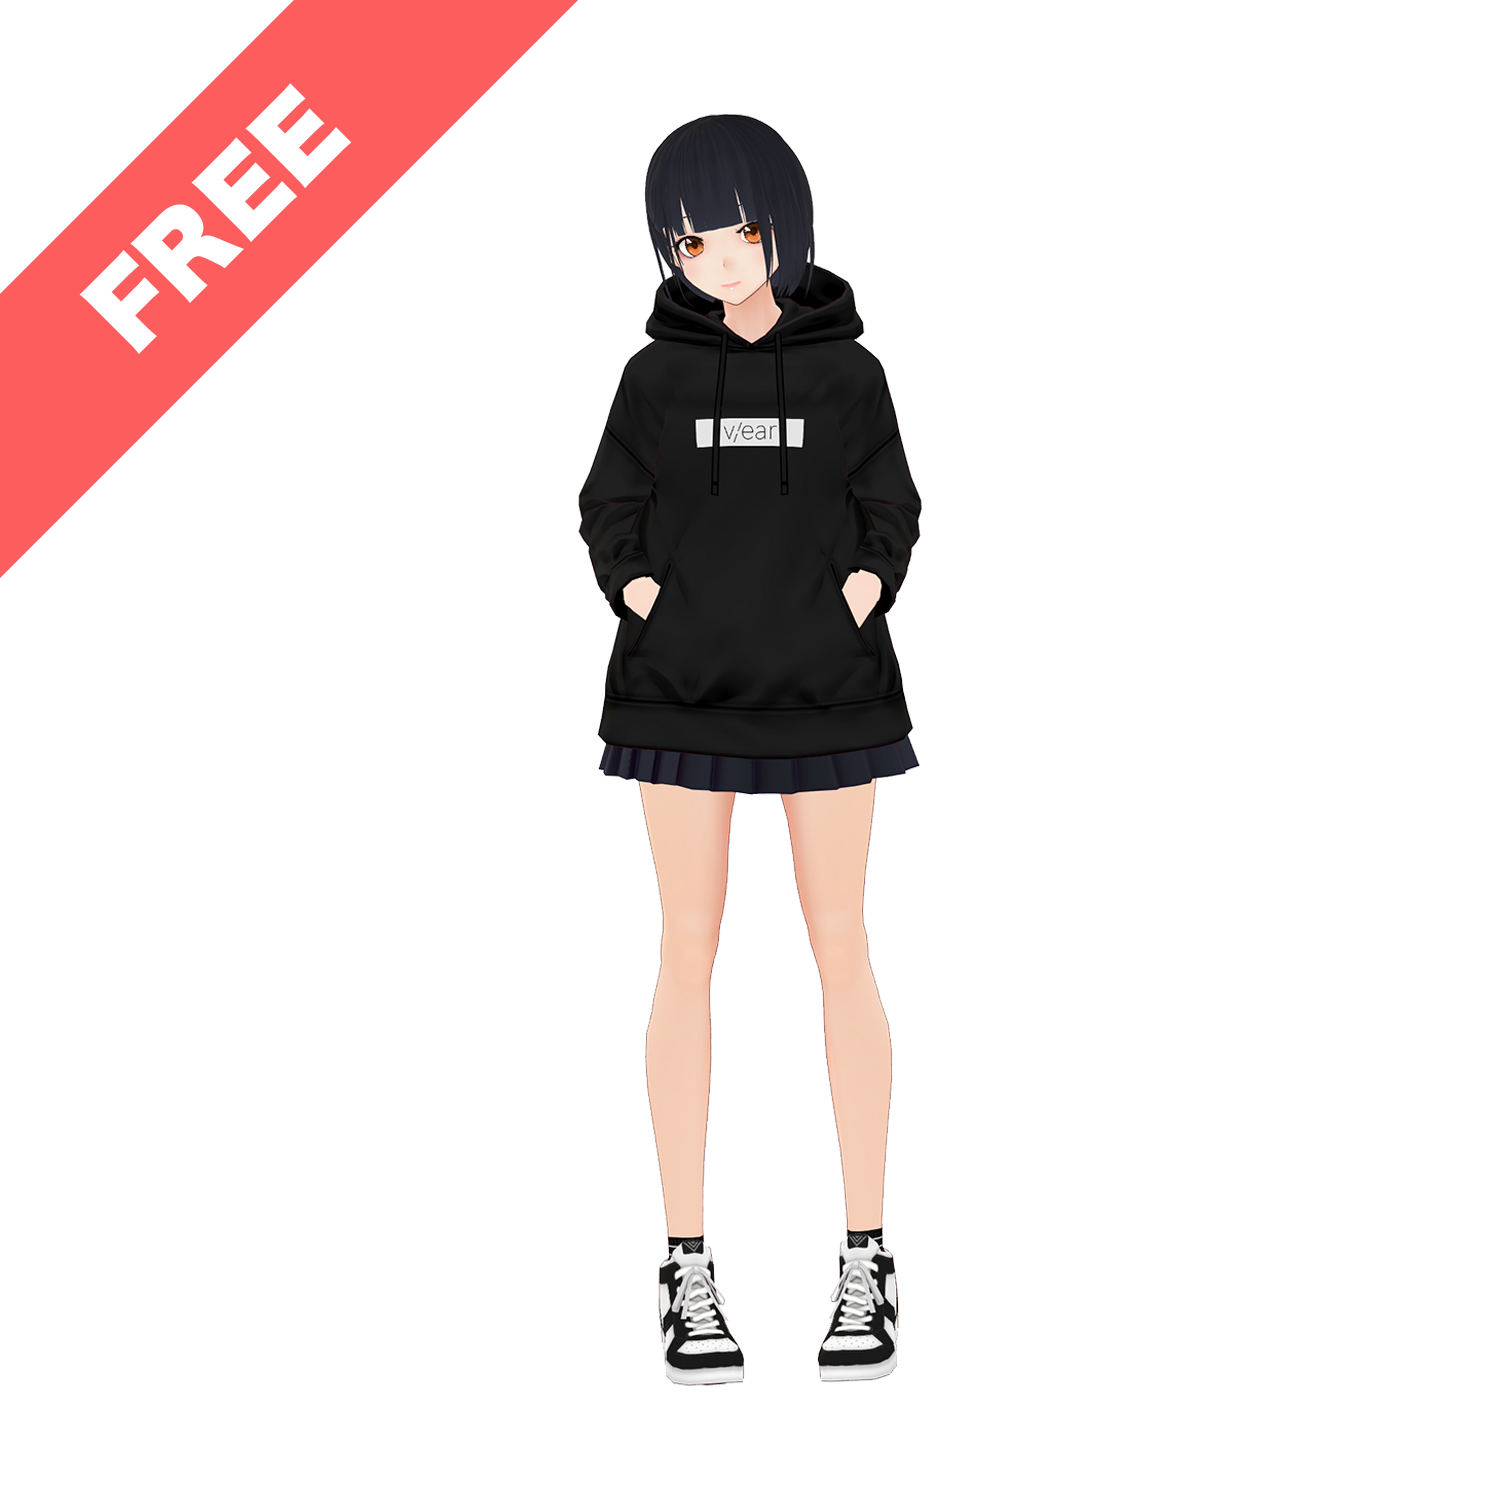 [VRoid]ワンポイントロゴパーカー4色セット - #vear_clothes - BOOTH